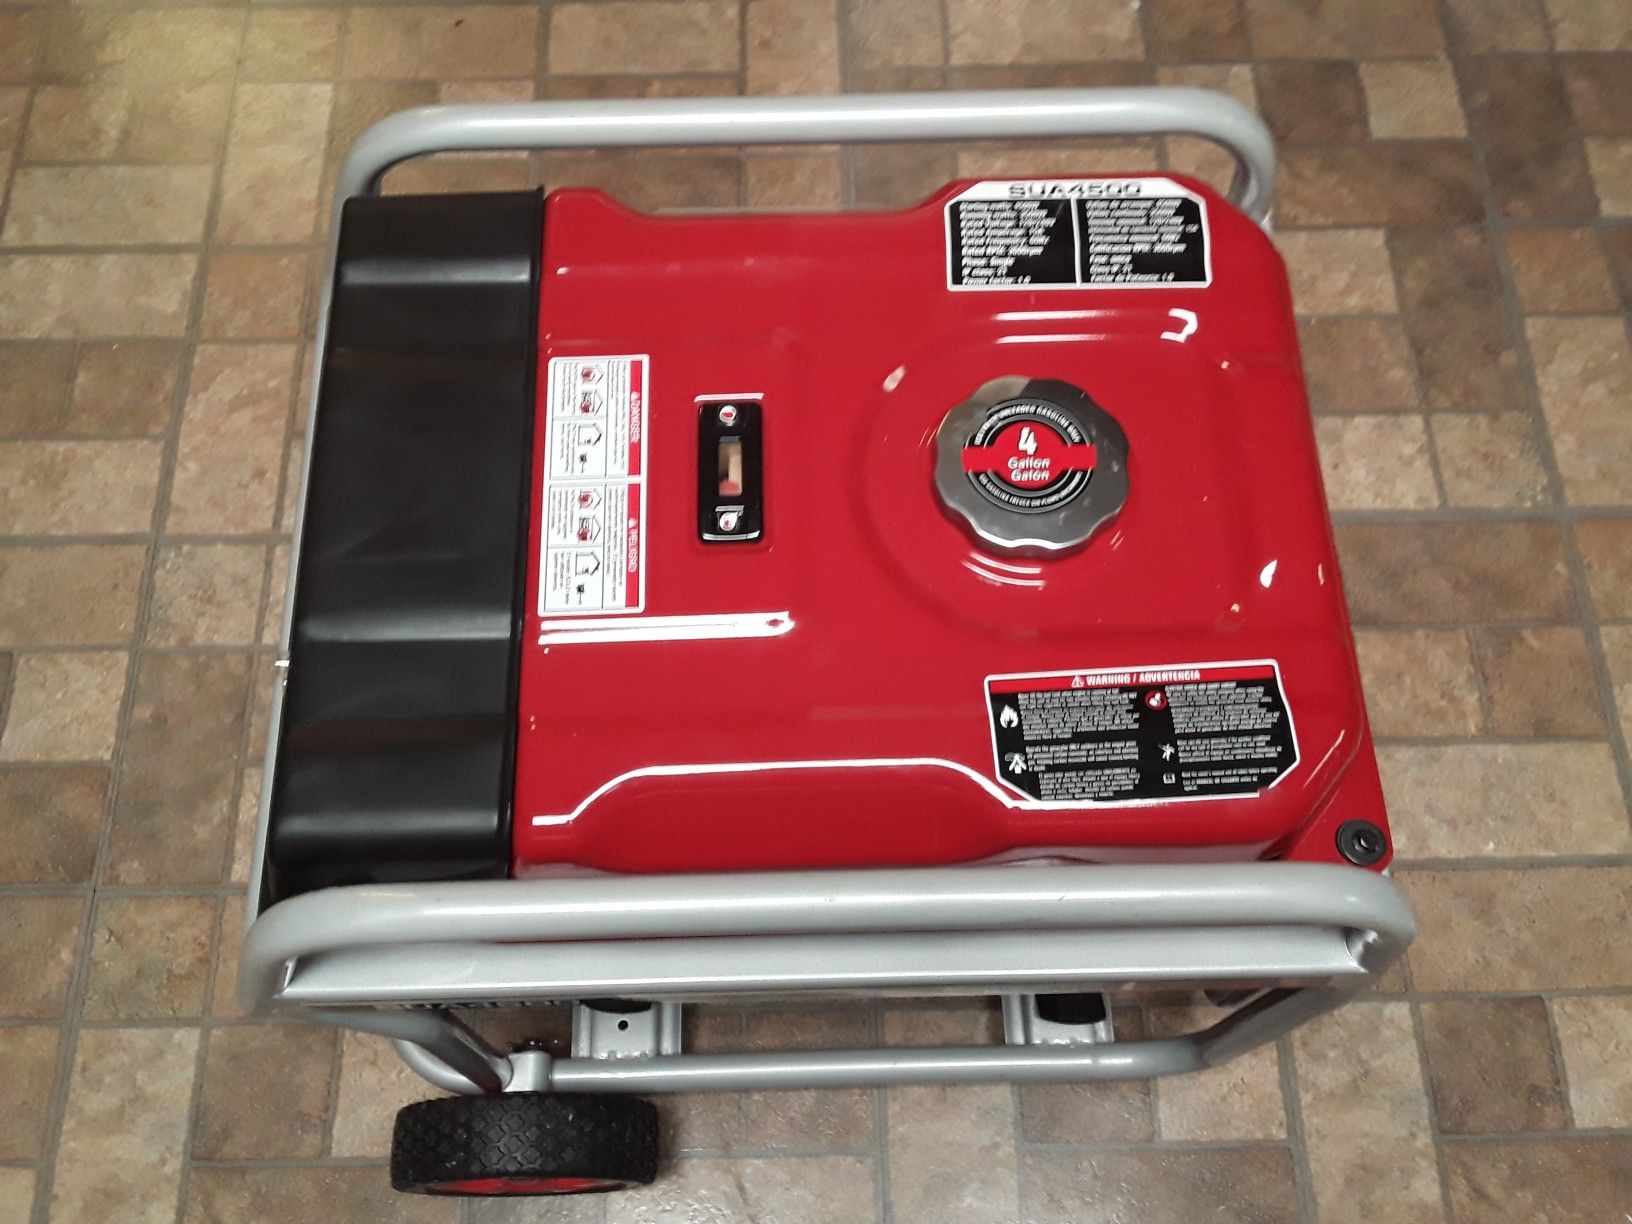 I-POWER , SUS 4500 GENERATOR, 4 GALLON TANK, EXCELLENT CONDITION, READY TO RUN, USED ONCE COMPLETE WITH OWNER MANUAL MUST SELL.